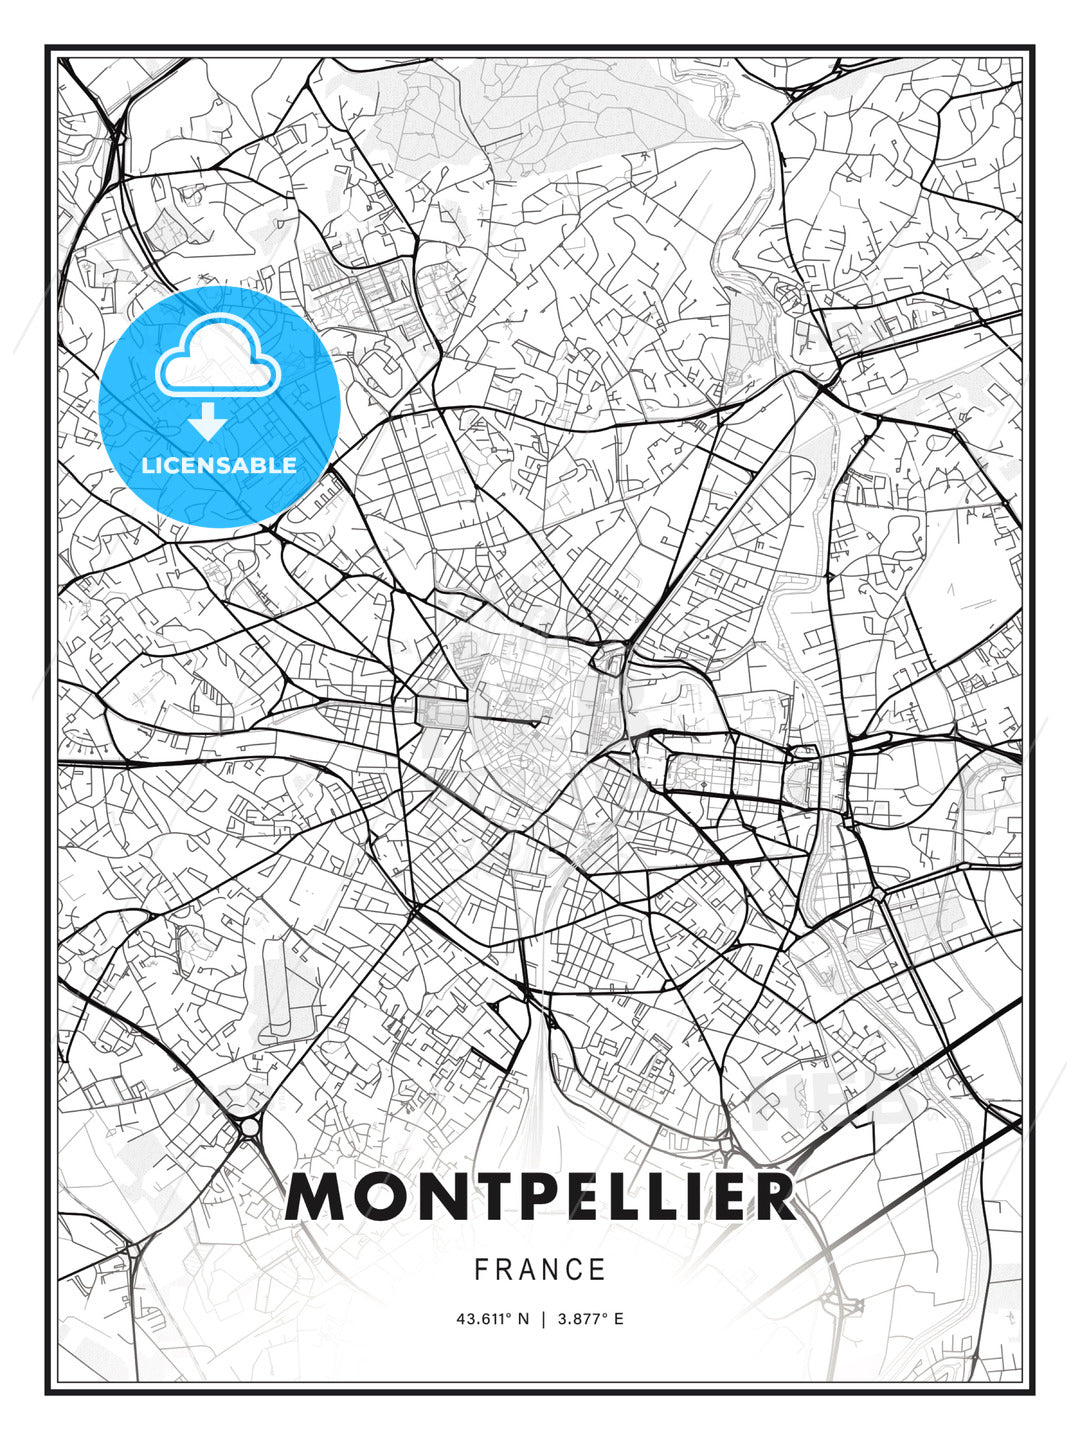 Montpellier, France, Modern Print Template in Various Formats - HEBSTREITS Sketches